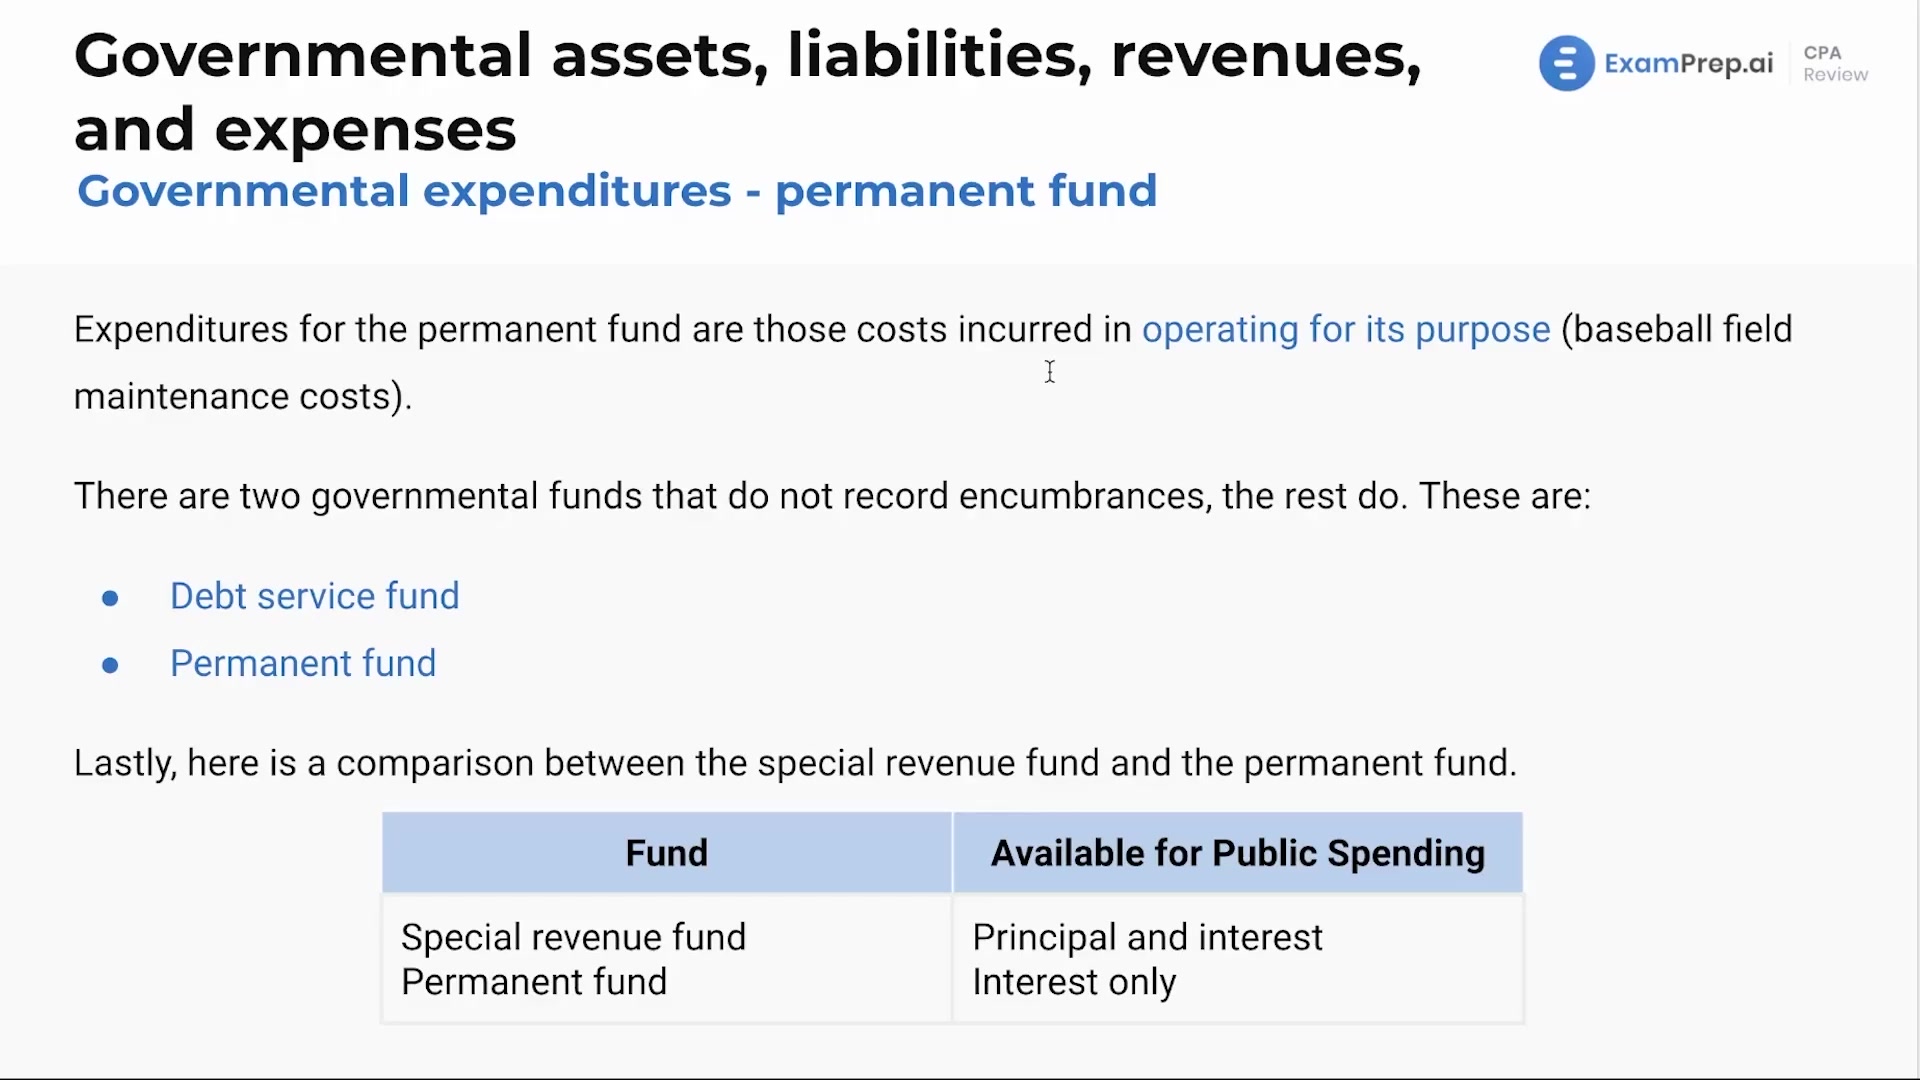 Governmental Revenues and Expenditures - Permanent Fund lesson thumbnail